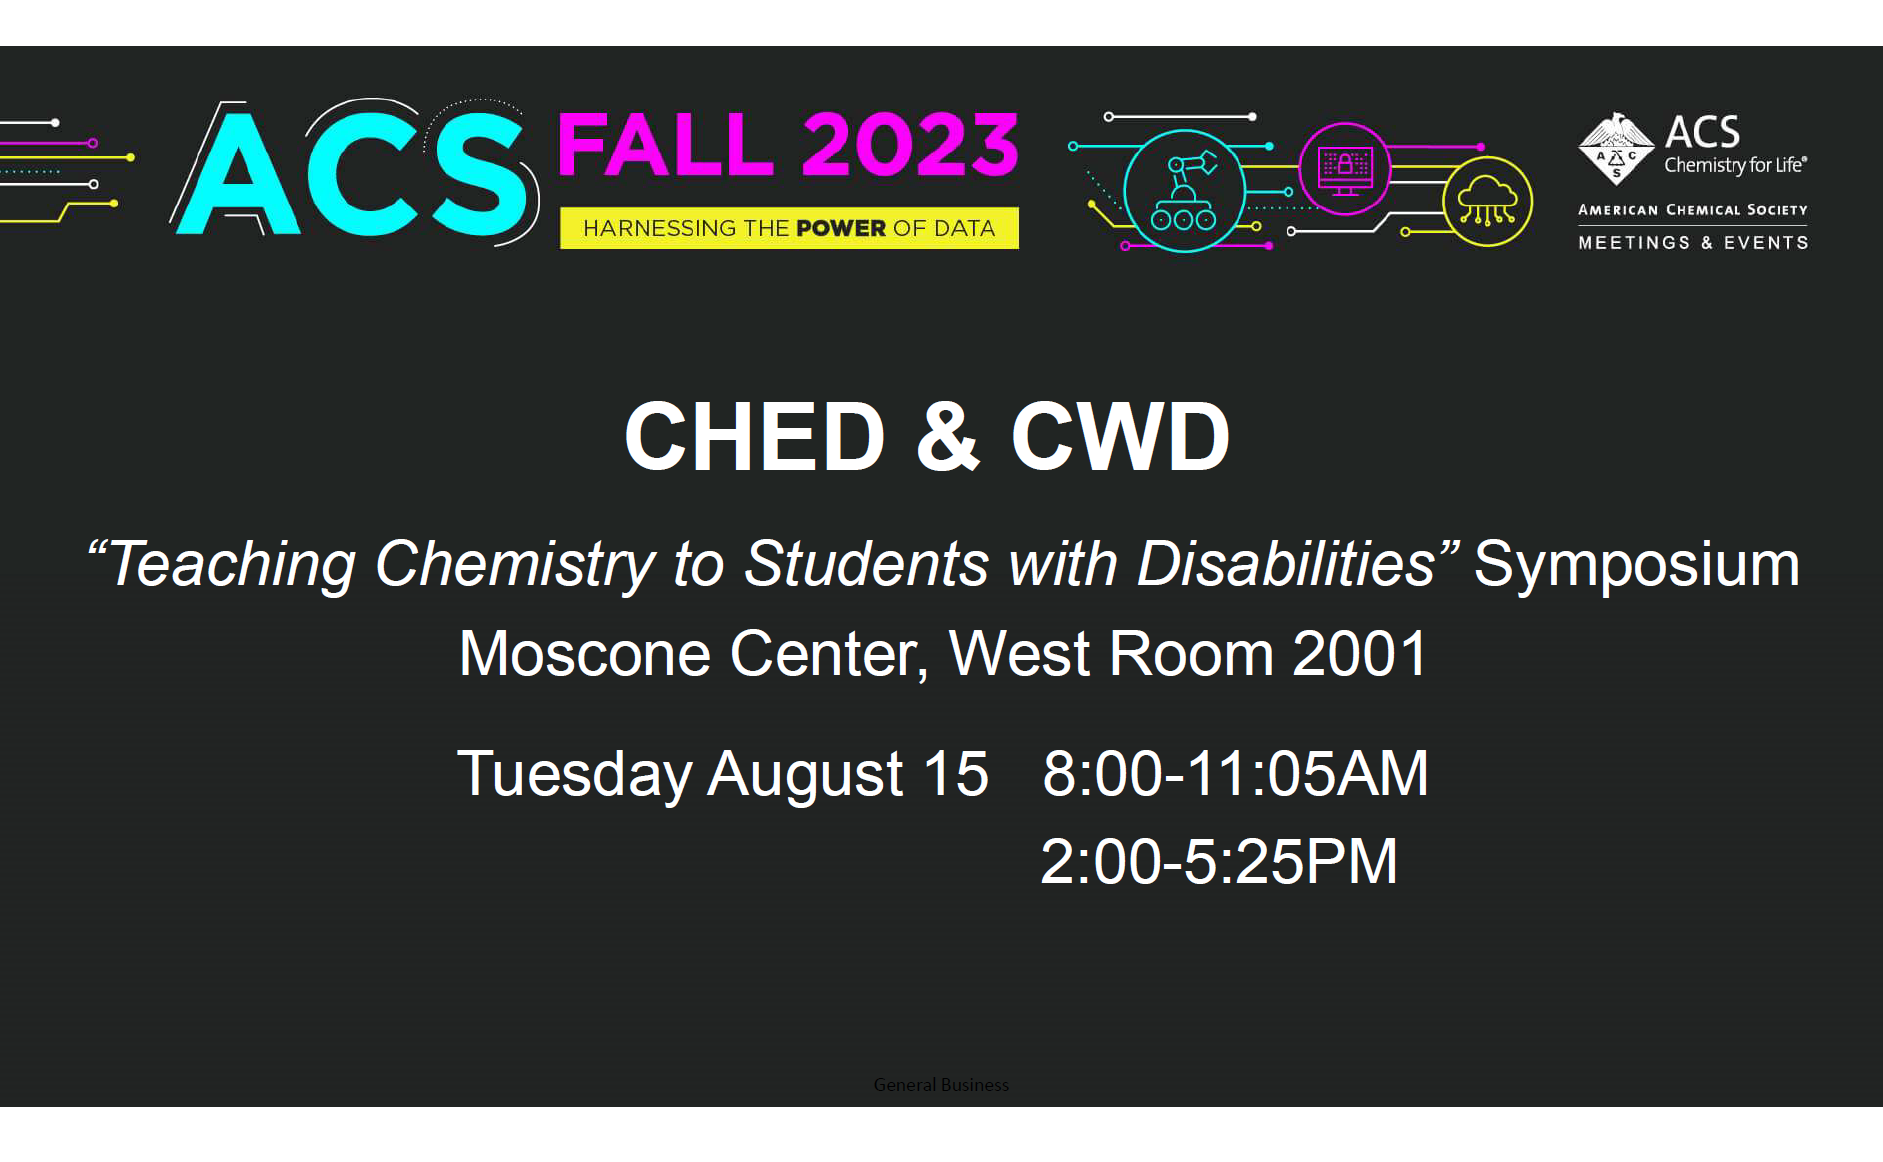 CHED & CWD Symposium : Teaching Chemistry to Students with Disabilities
 